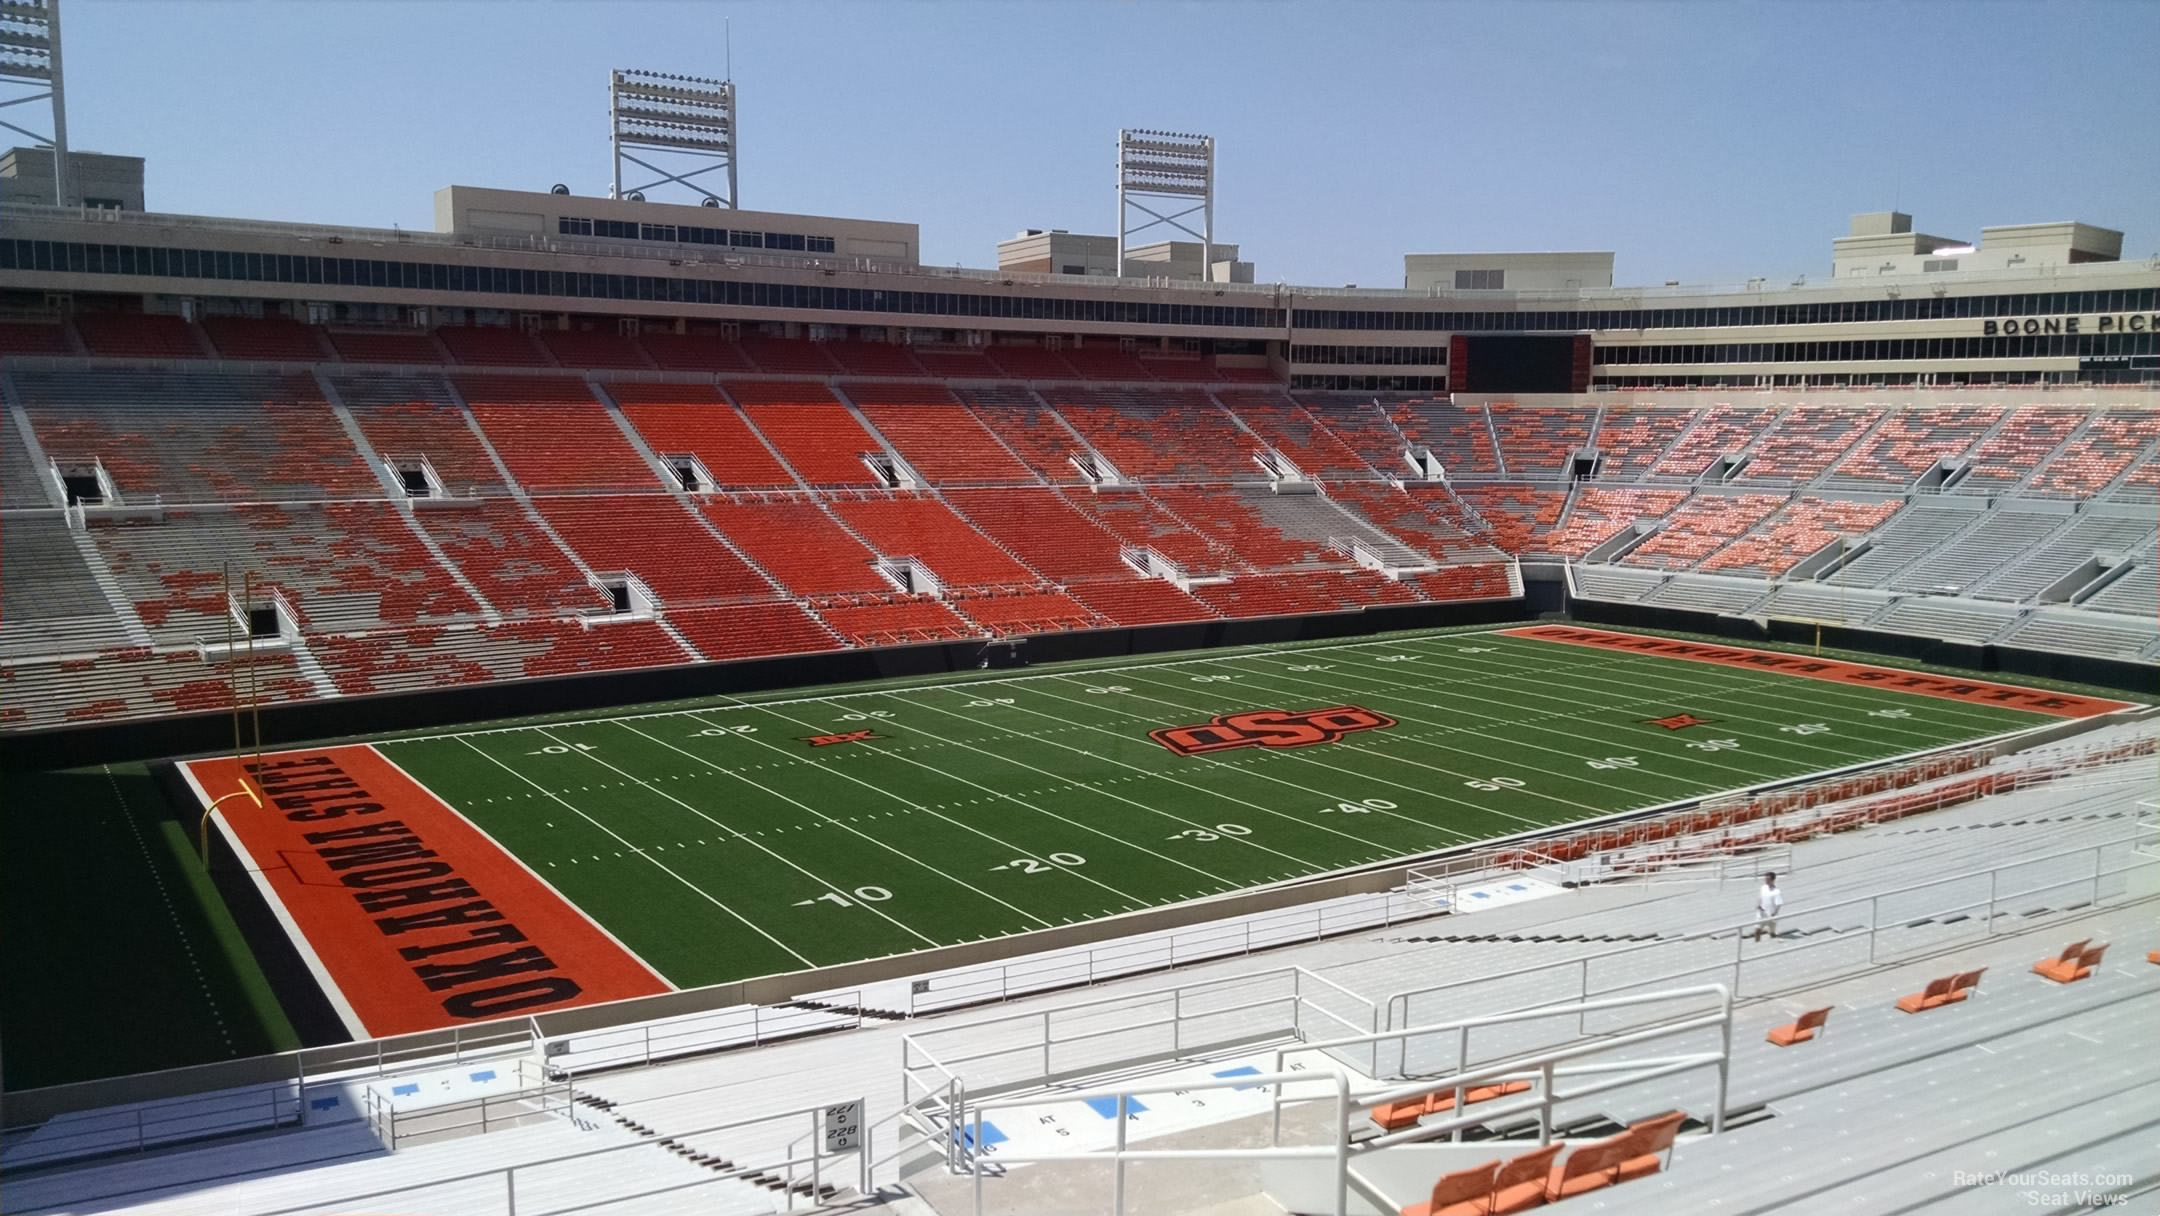 section 334, row 19 seat view  - boone pickens stadium